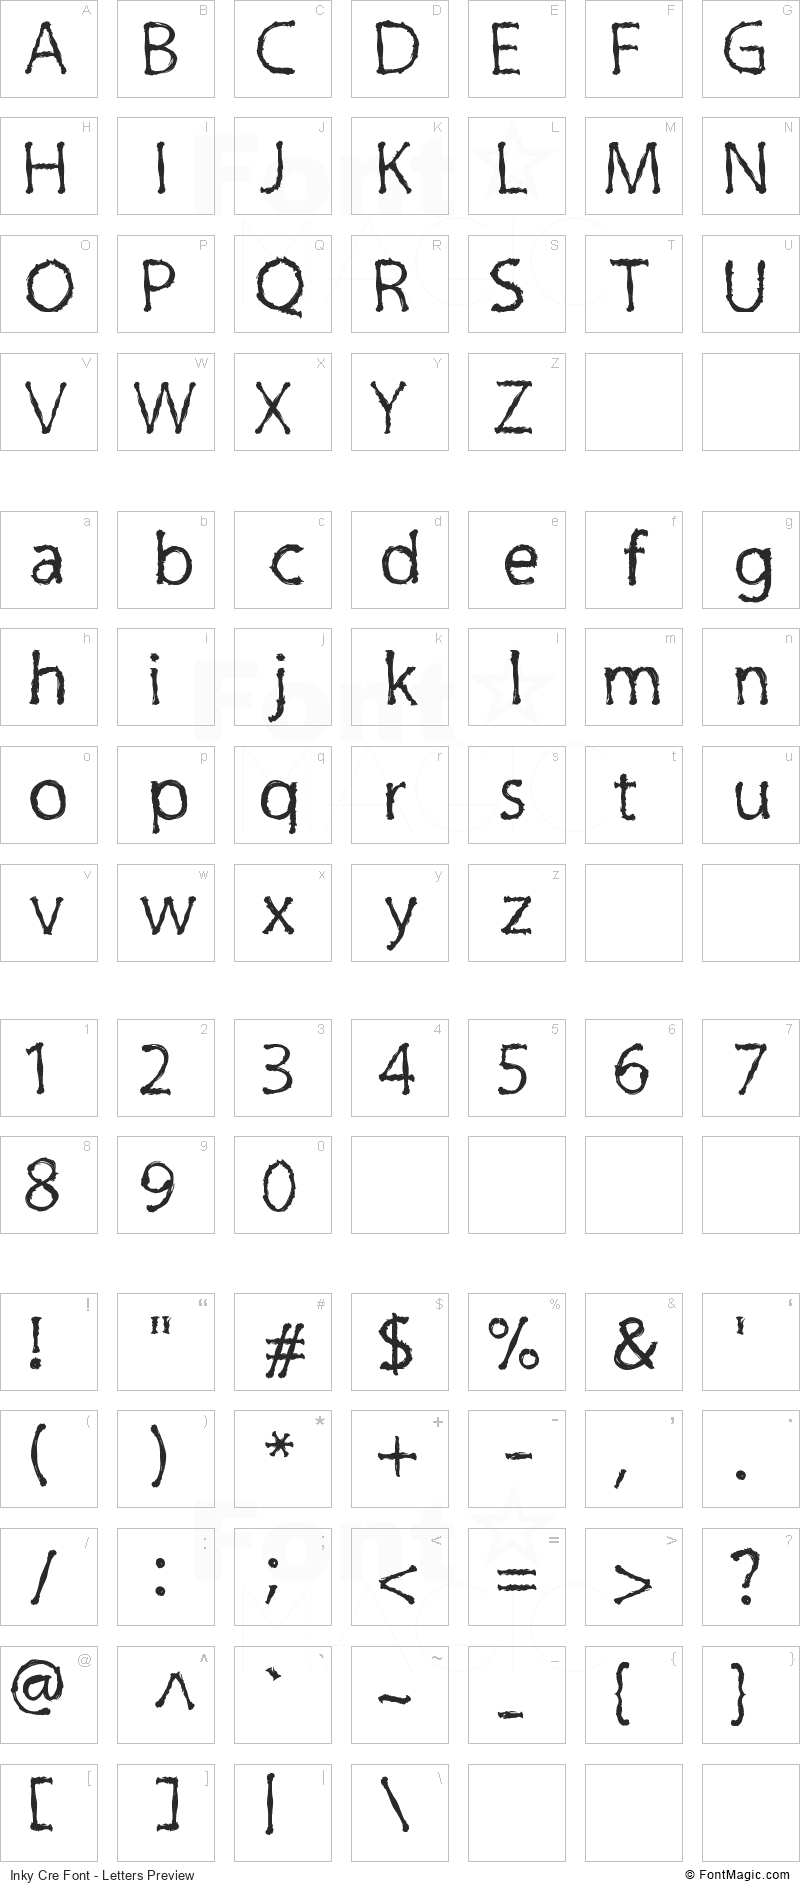 Inky Cre Font - All Latters Preview Chart